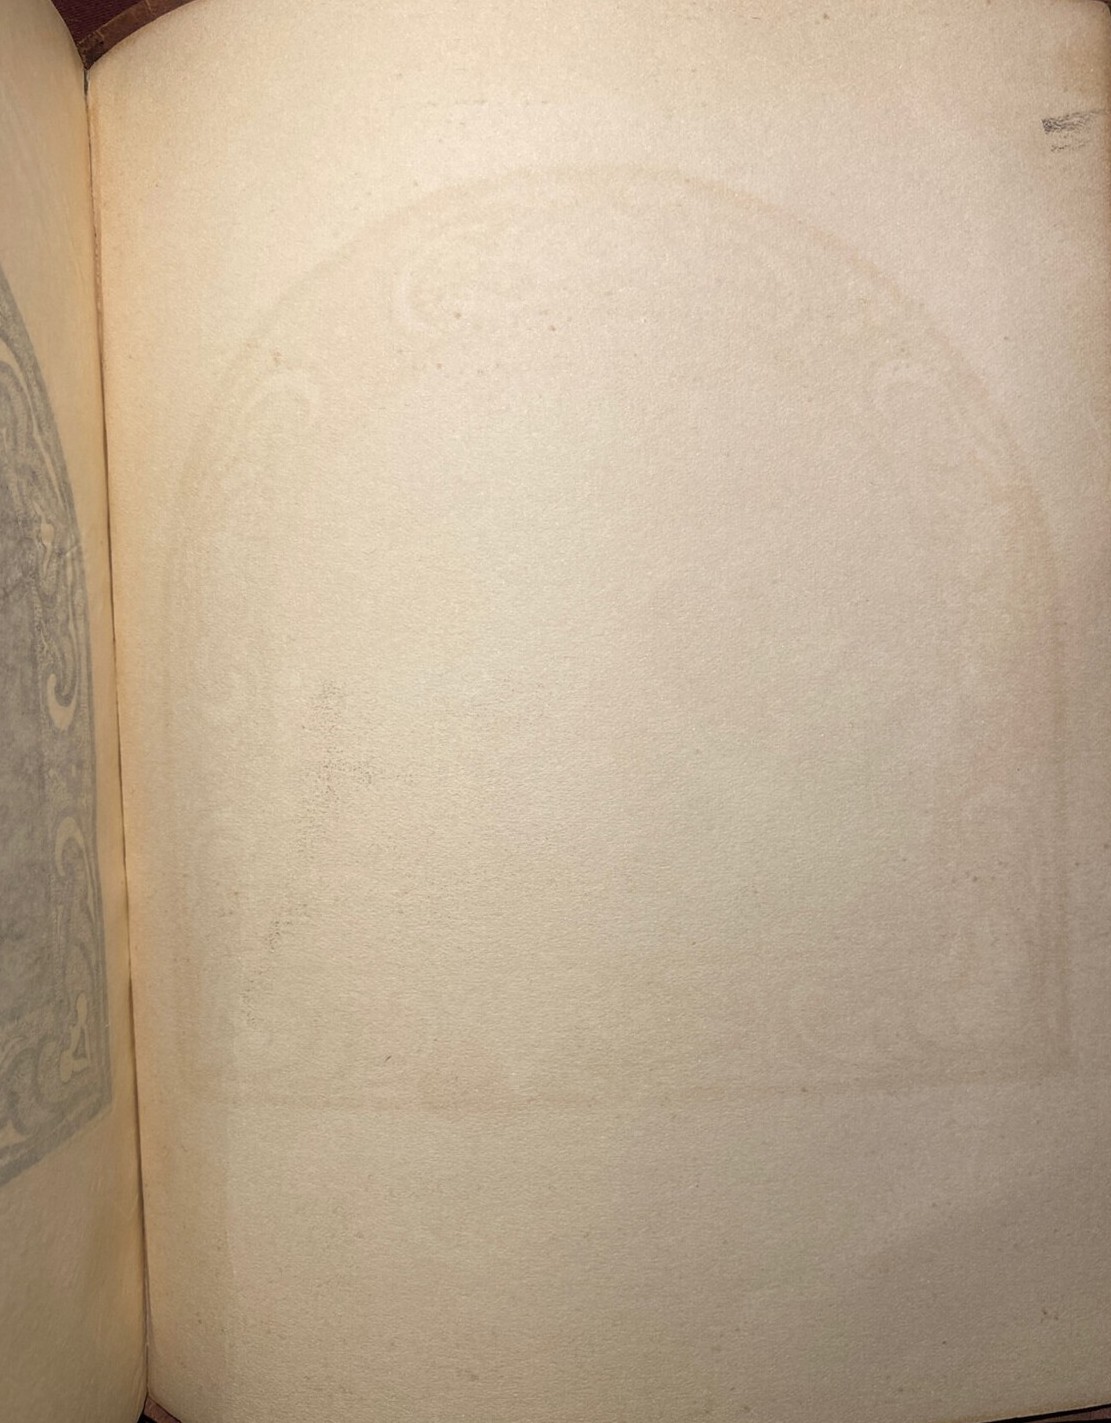 Faded imprint of the photo of the woman bowing